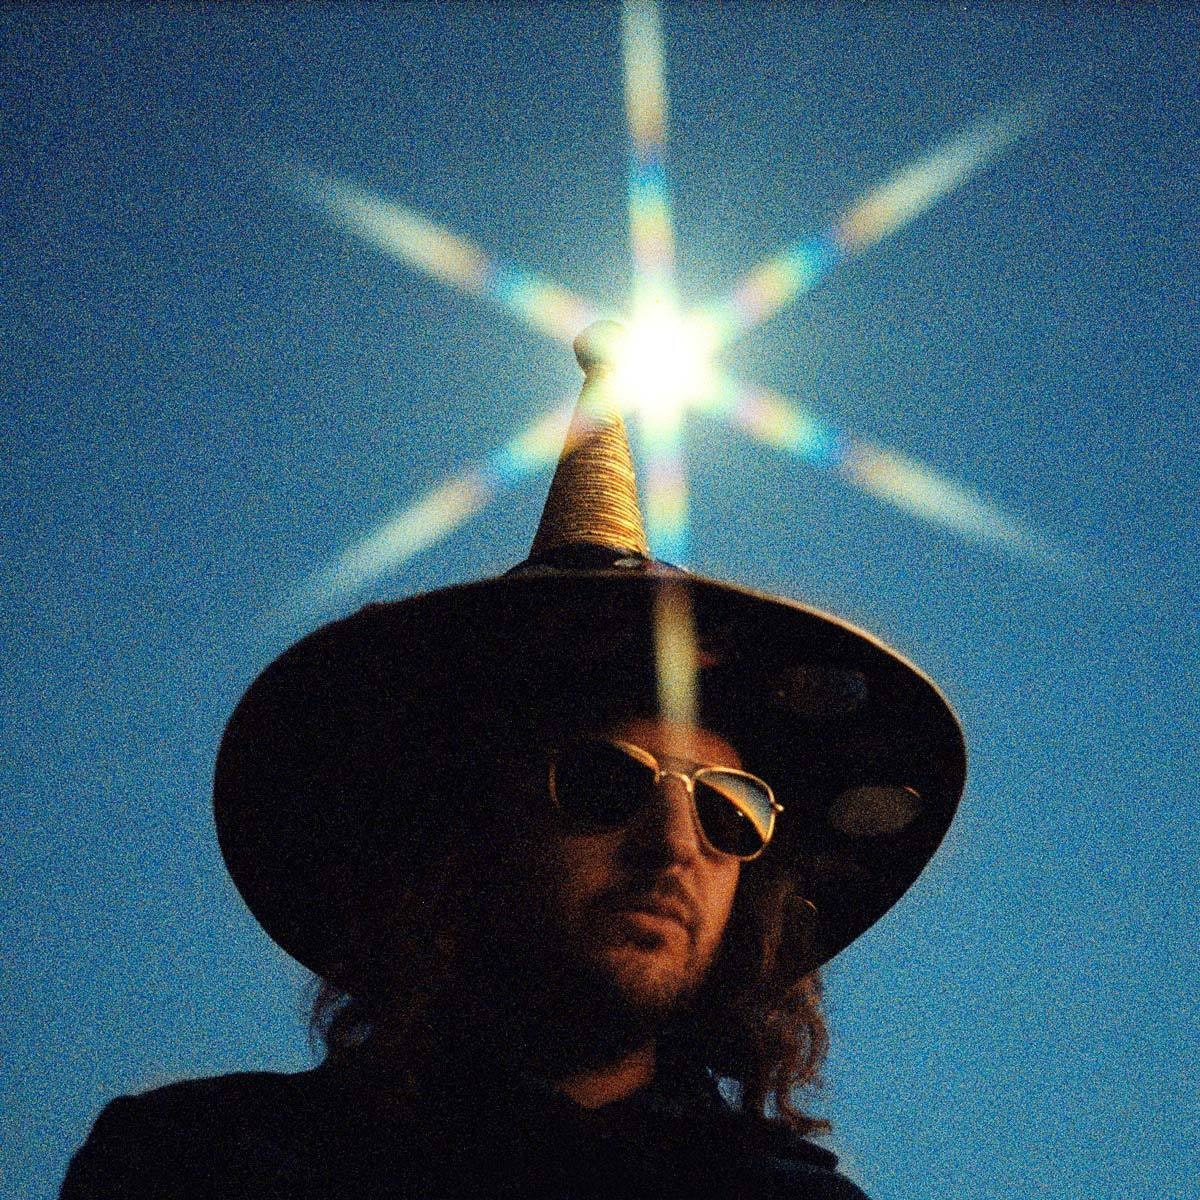 Northern Transmissios reviews 'The Other' the new full-length by Sub Pop artist King Tuff